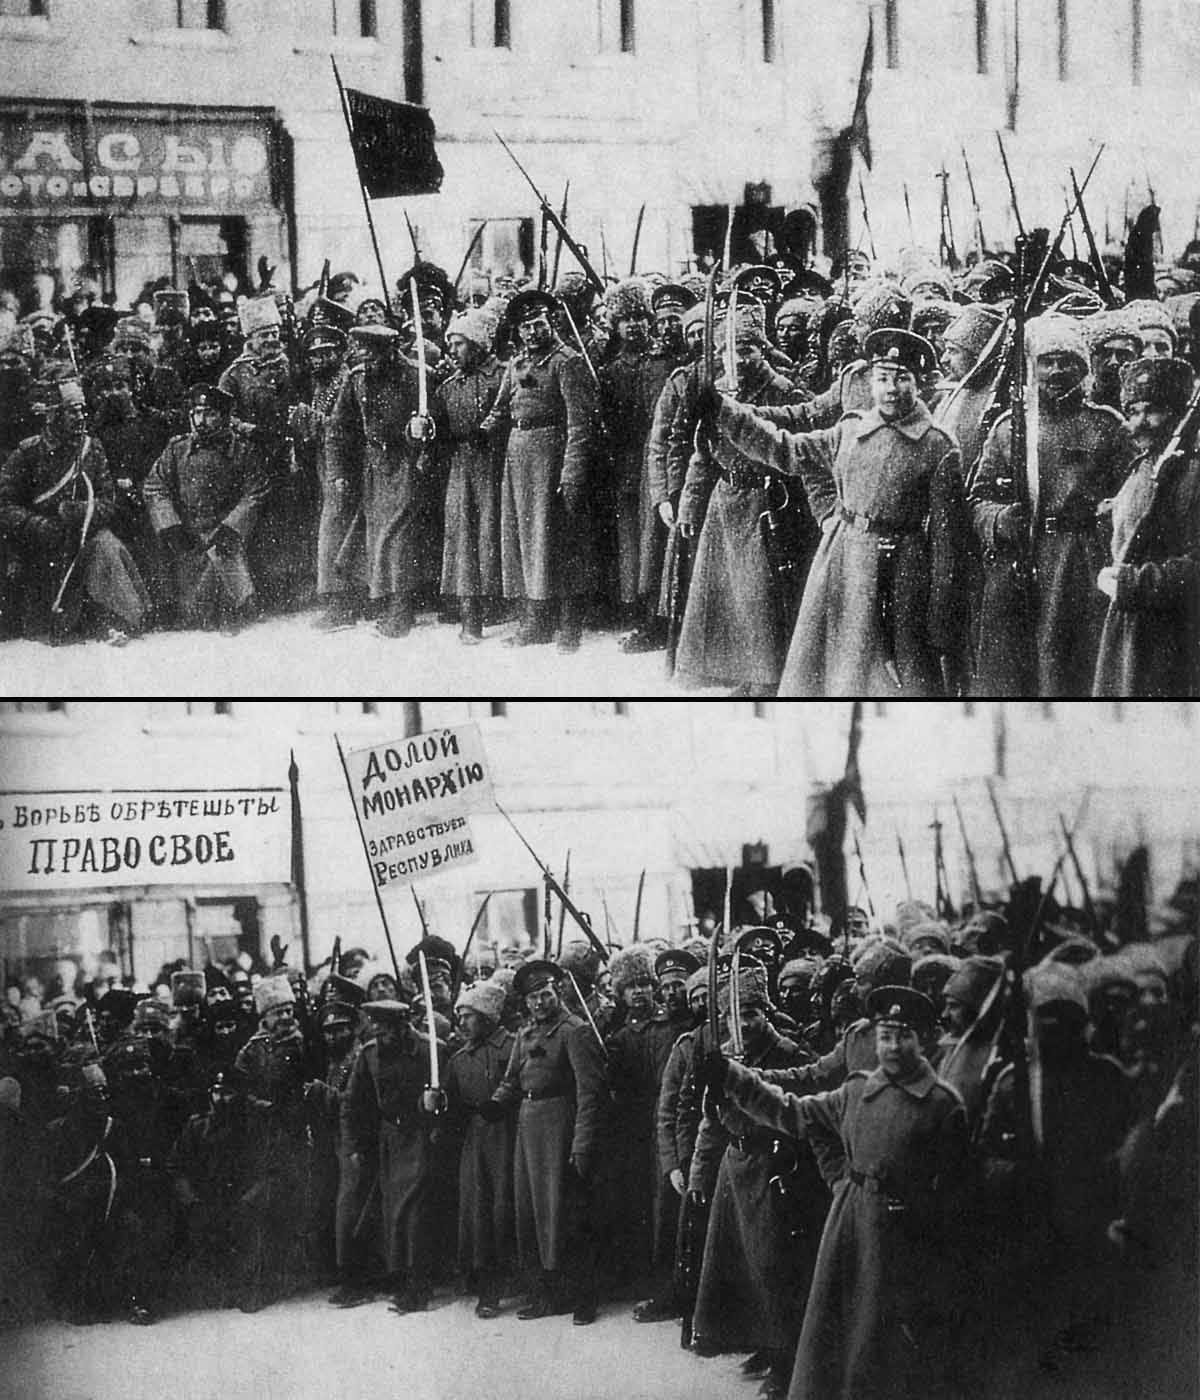 Airbrushing Soviet history was sometimes about adding aspects, not just deleting them. For instance, this picture from a 1917 demonstration was not considered revolutionary enough by the powers that be: the shop sign on the left says “Clocks. Gold and silver” and the text on a flag is unreadable. But hey presto, a little bit of Bolshevik magic later and the sign reads “You’ll take what’s yours through struggle” and the flag – “Down with the monarchy!”